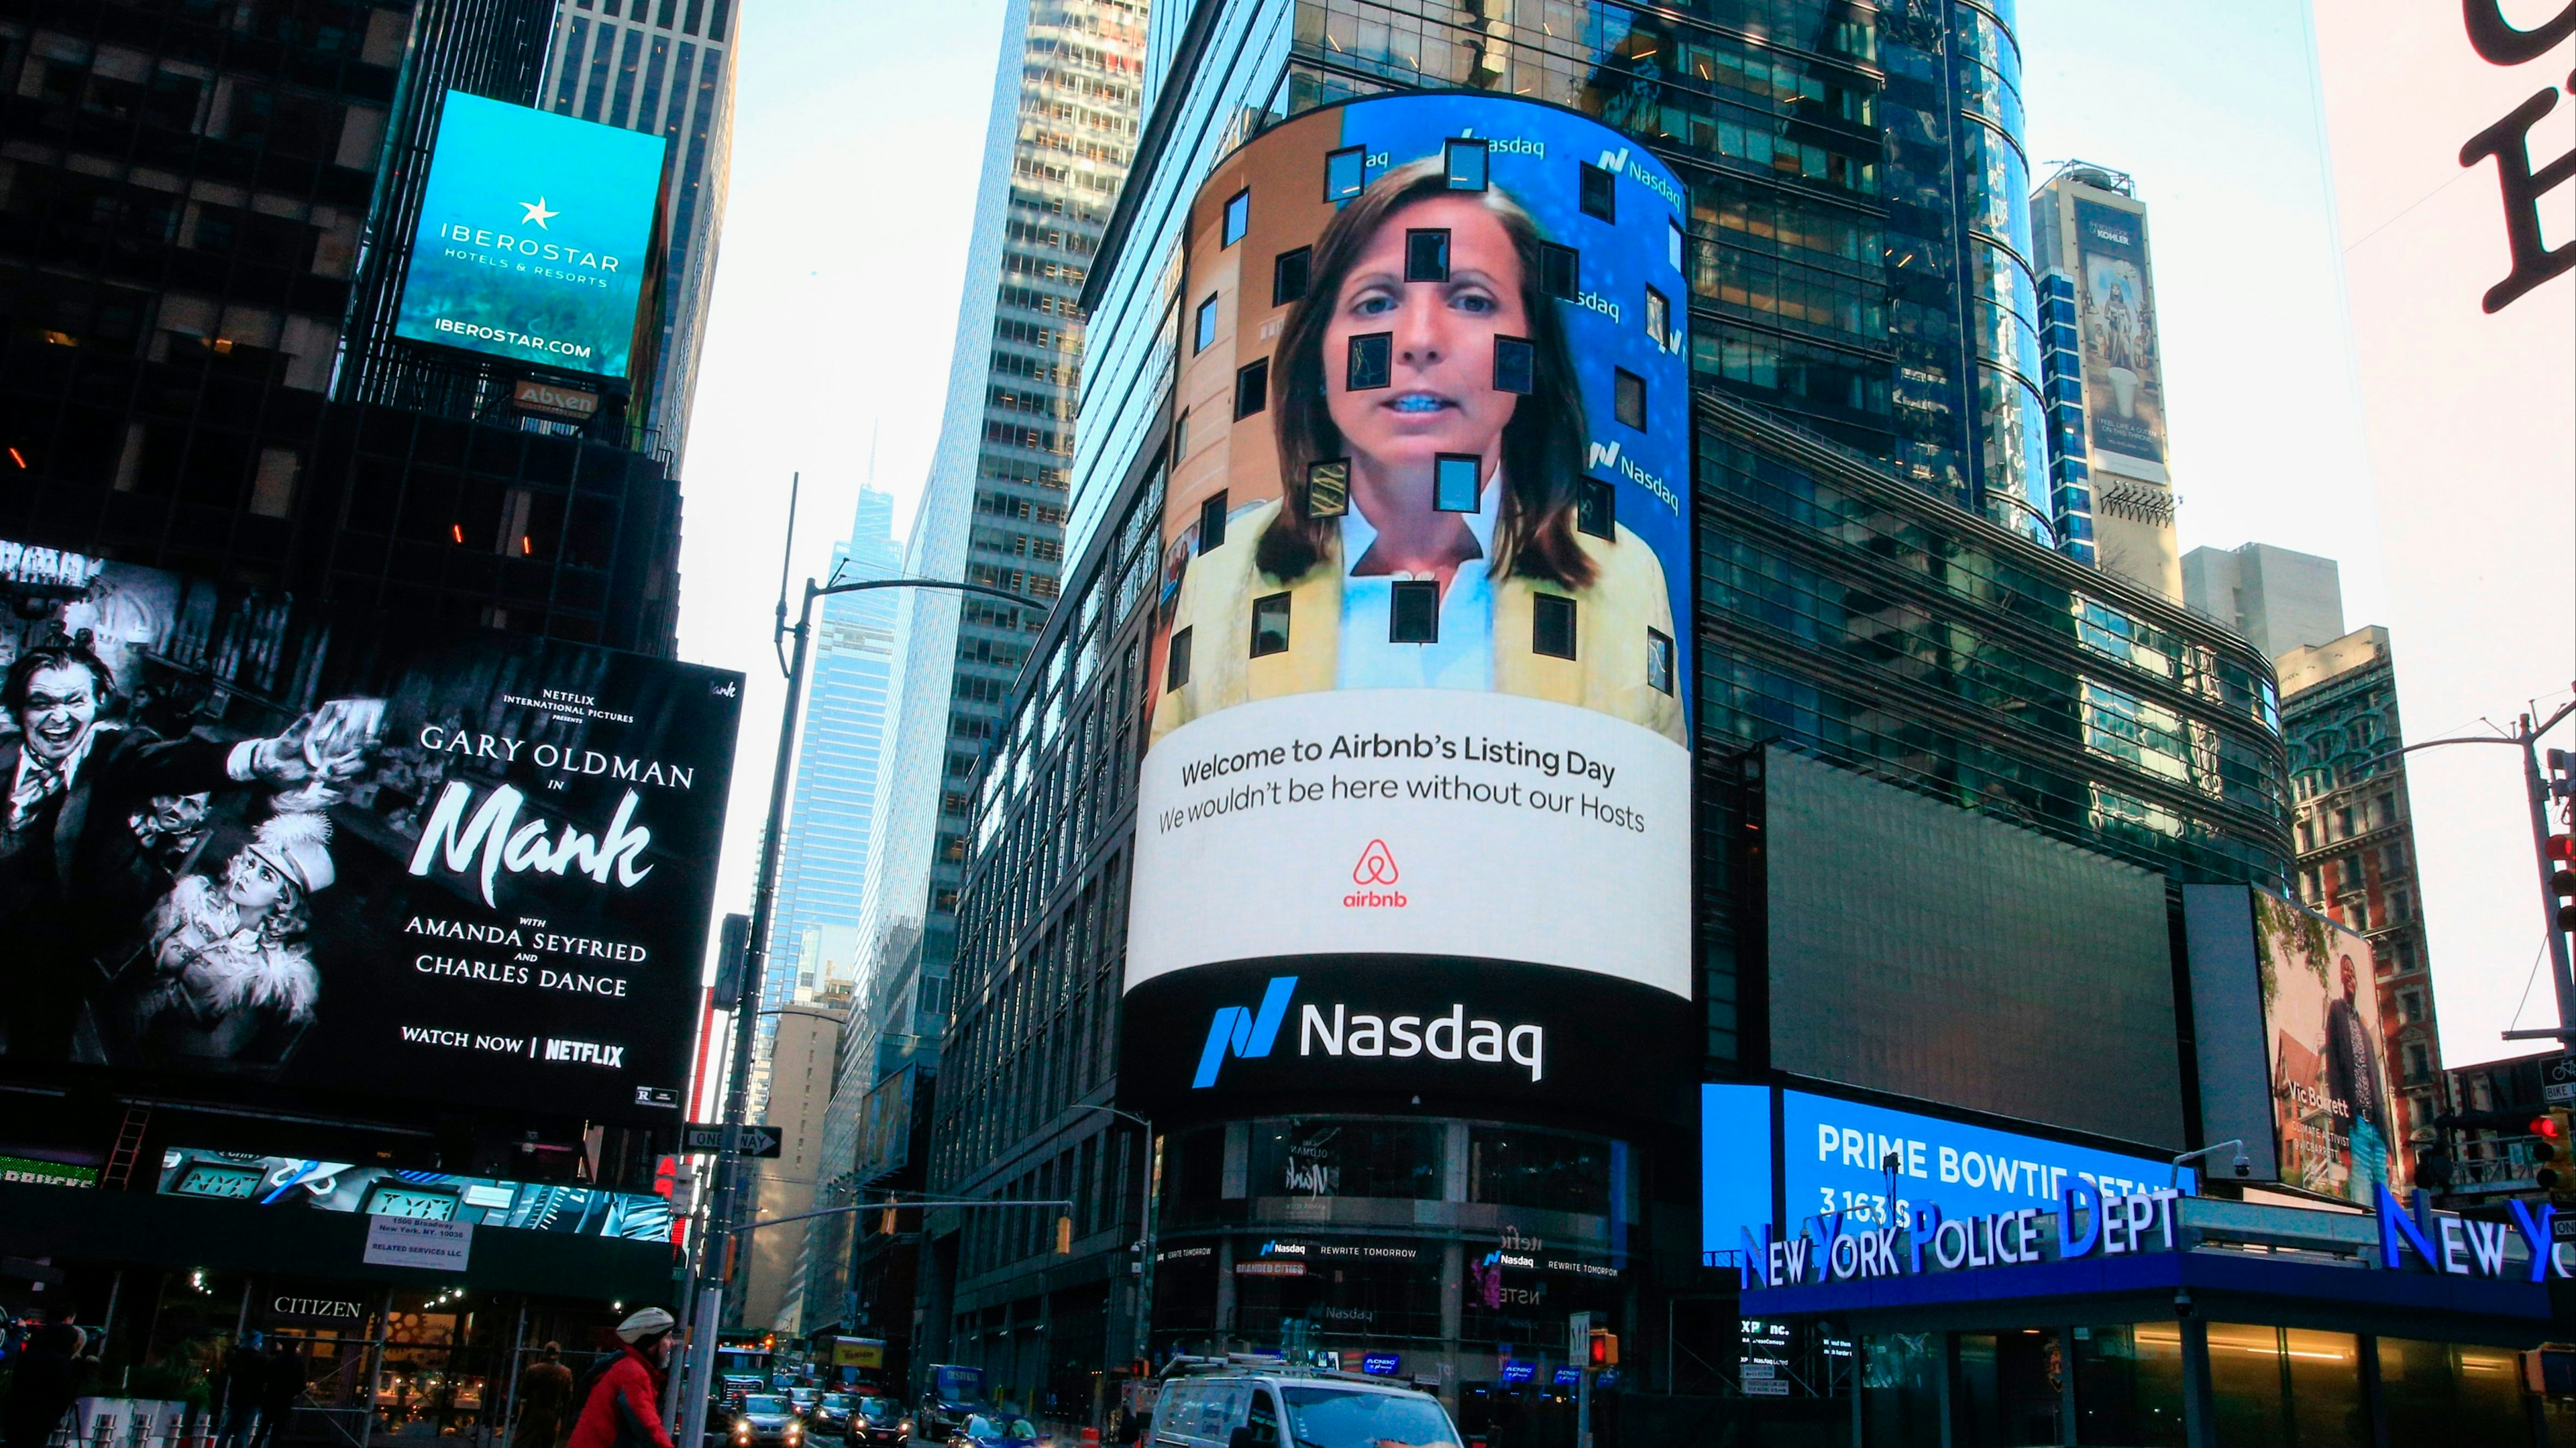 The Airbnb logo is displayed on the Nasdaq digital billboard in Times Square in New York on December 10, 2020.